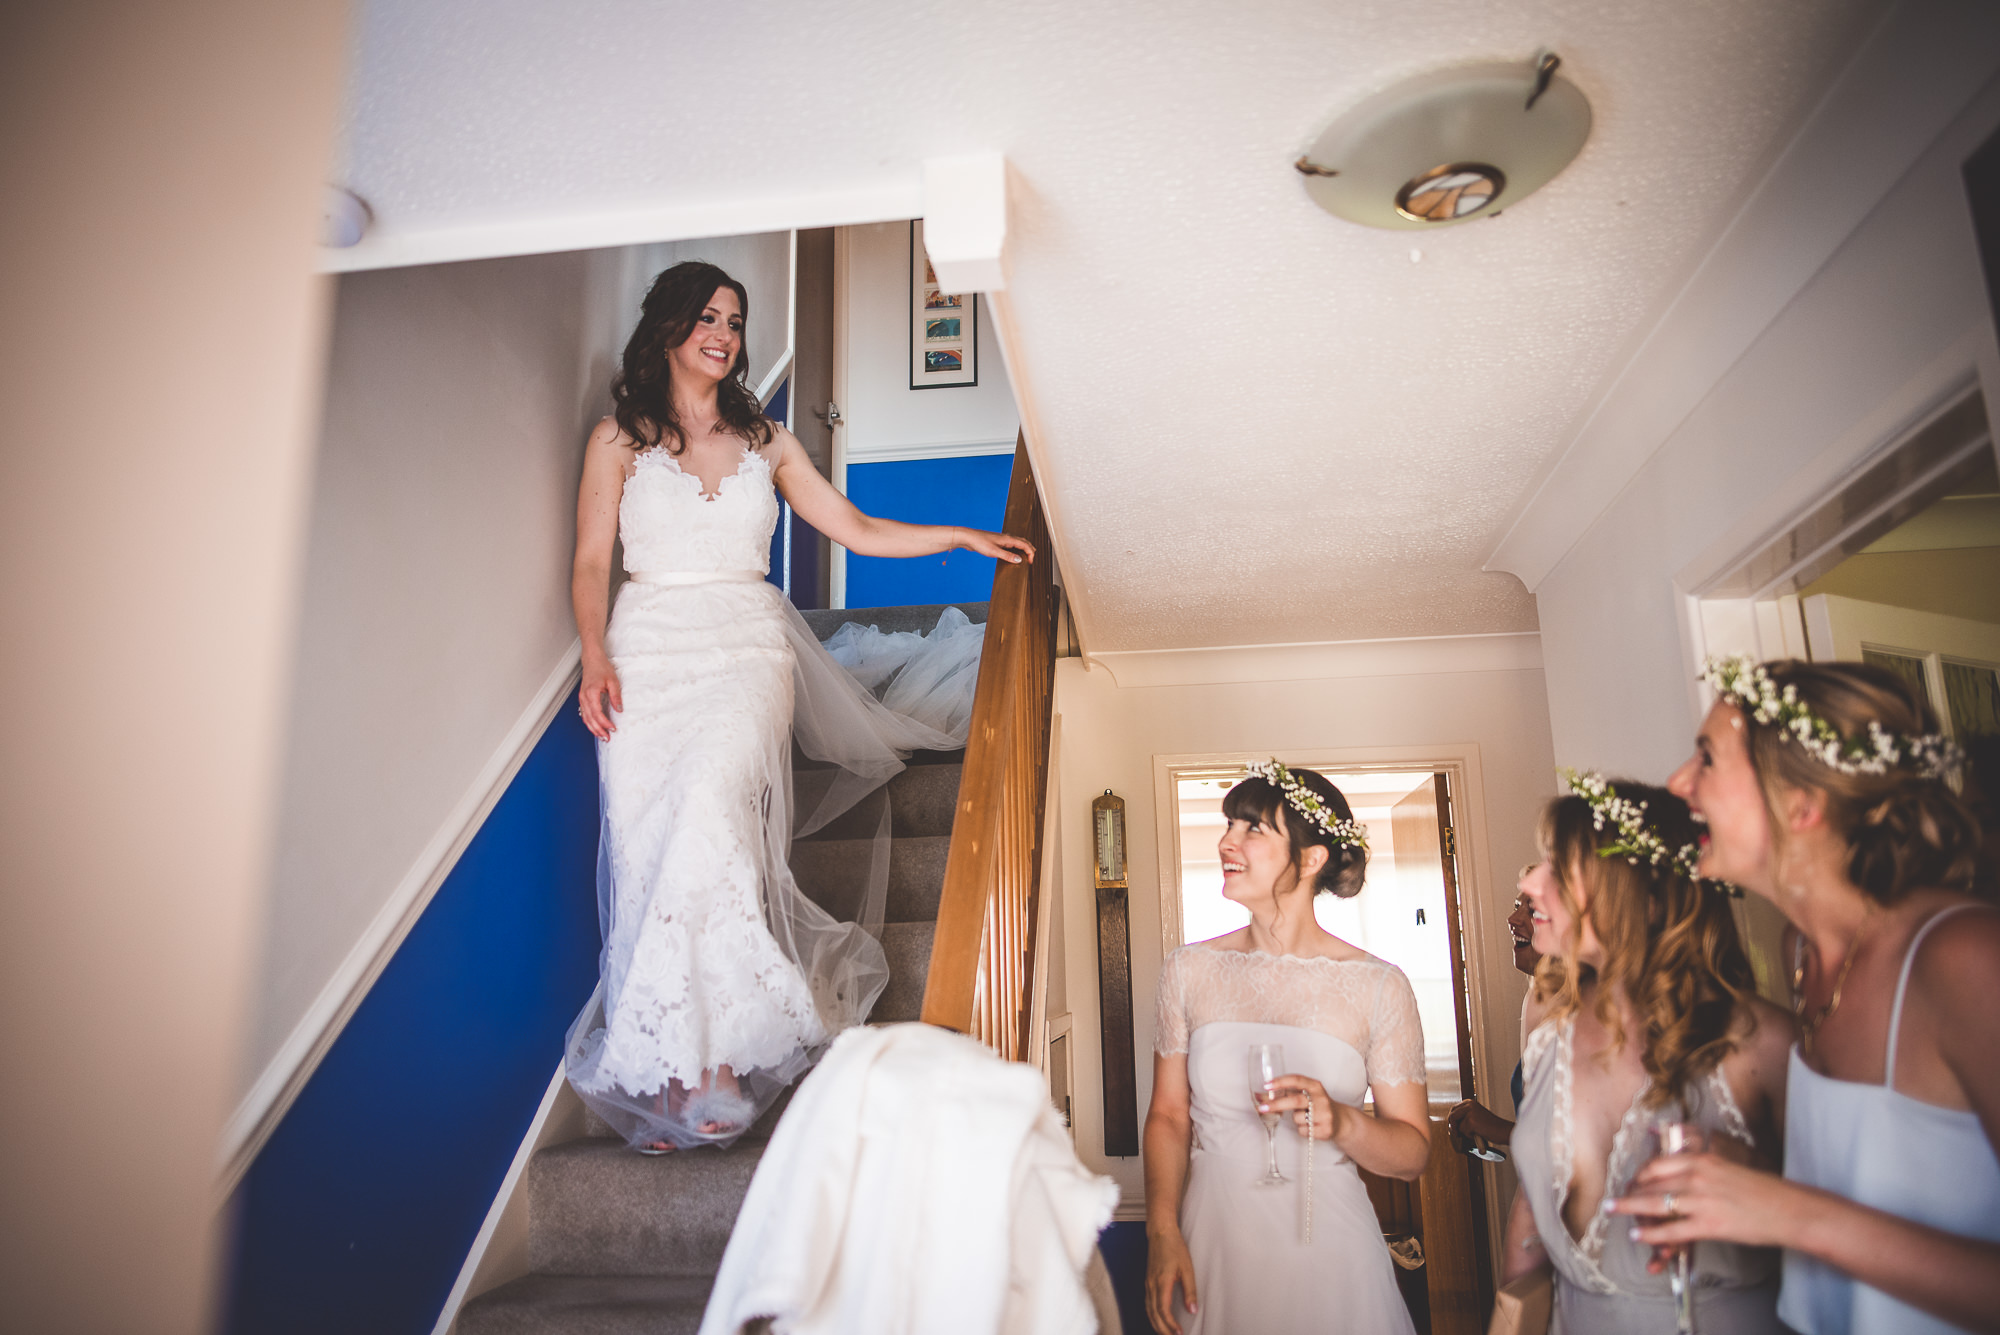 A wedding photographer captures the bride and her bridesmaids descending the stairs.